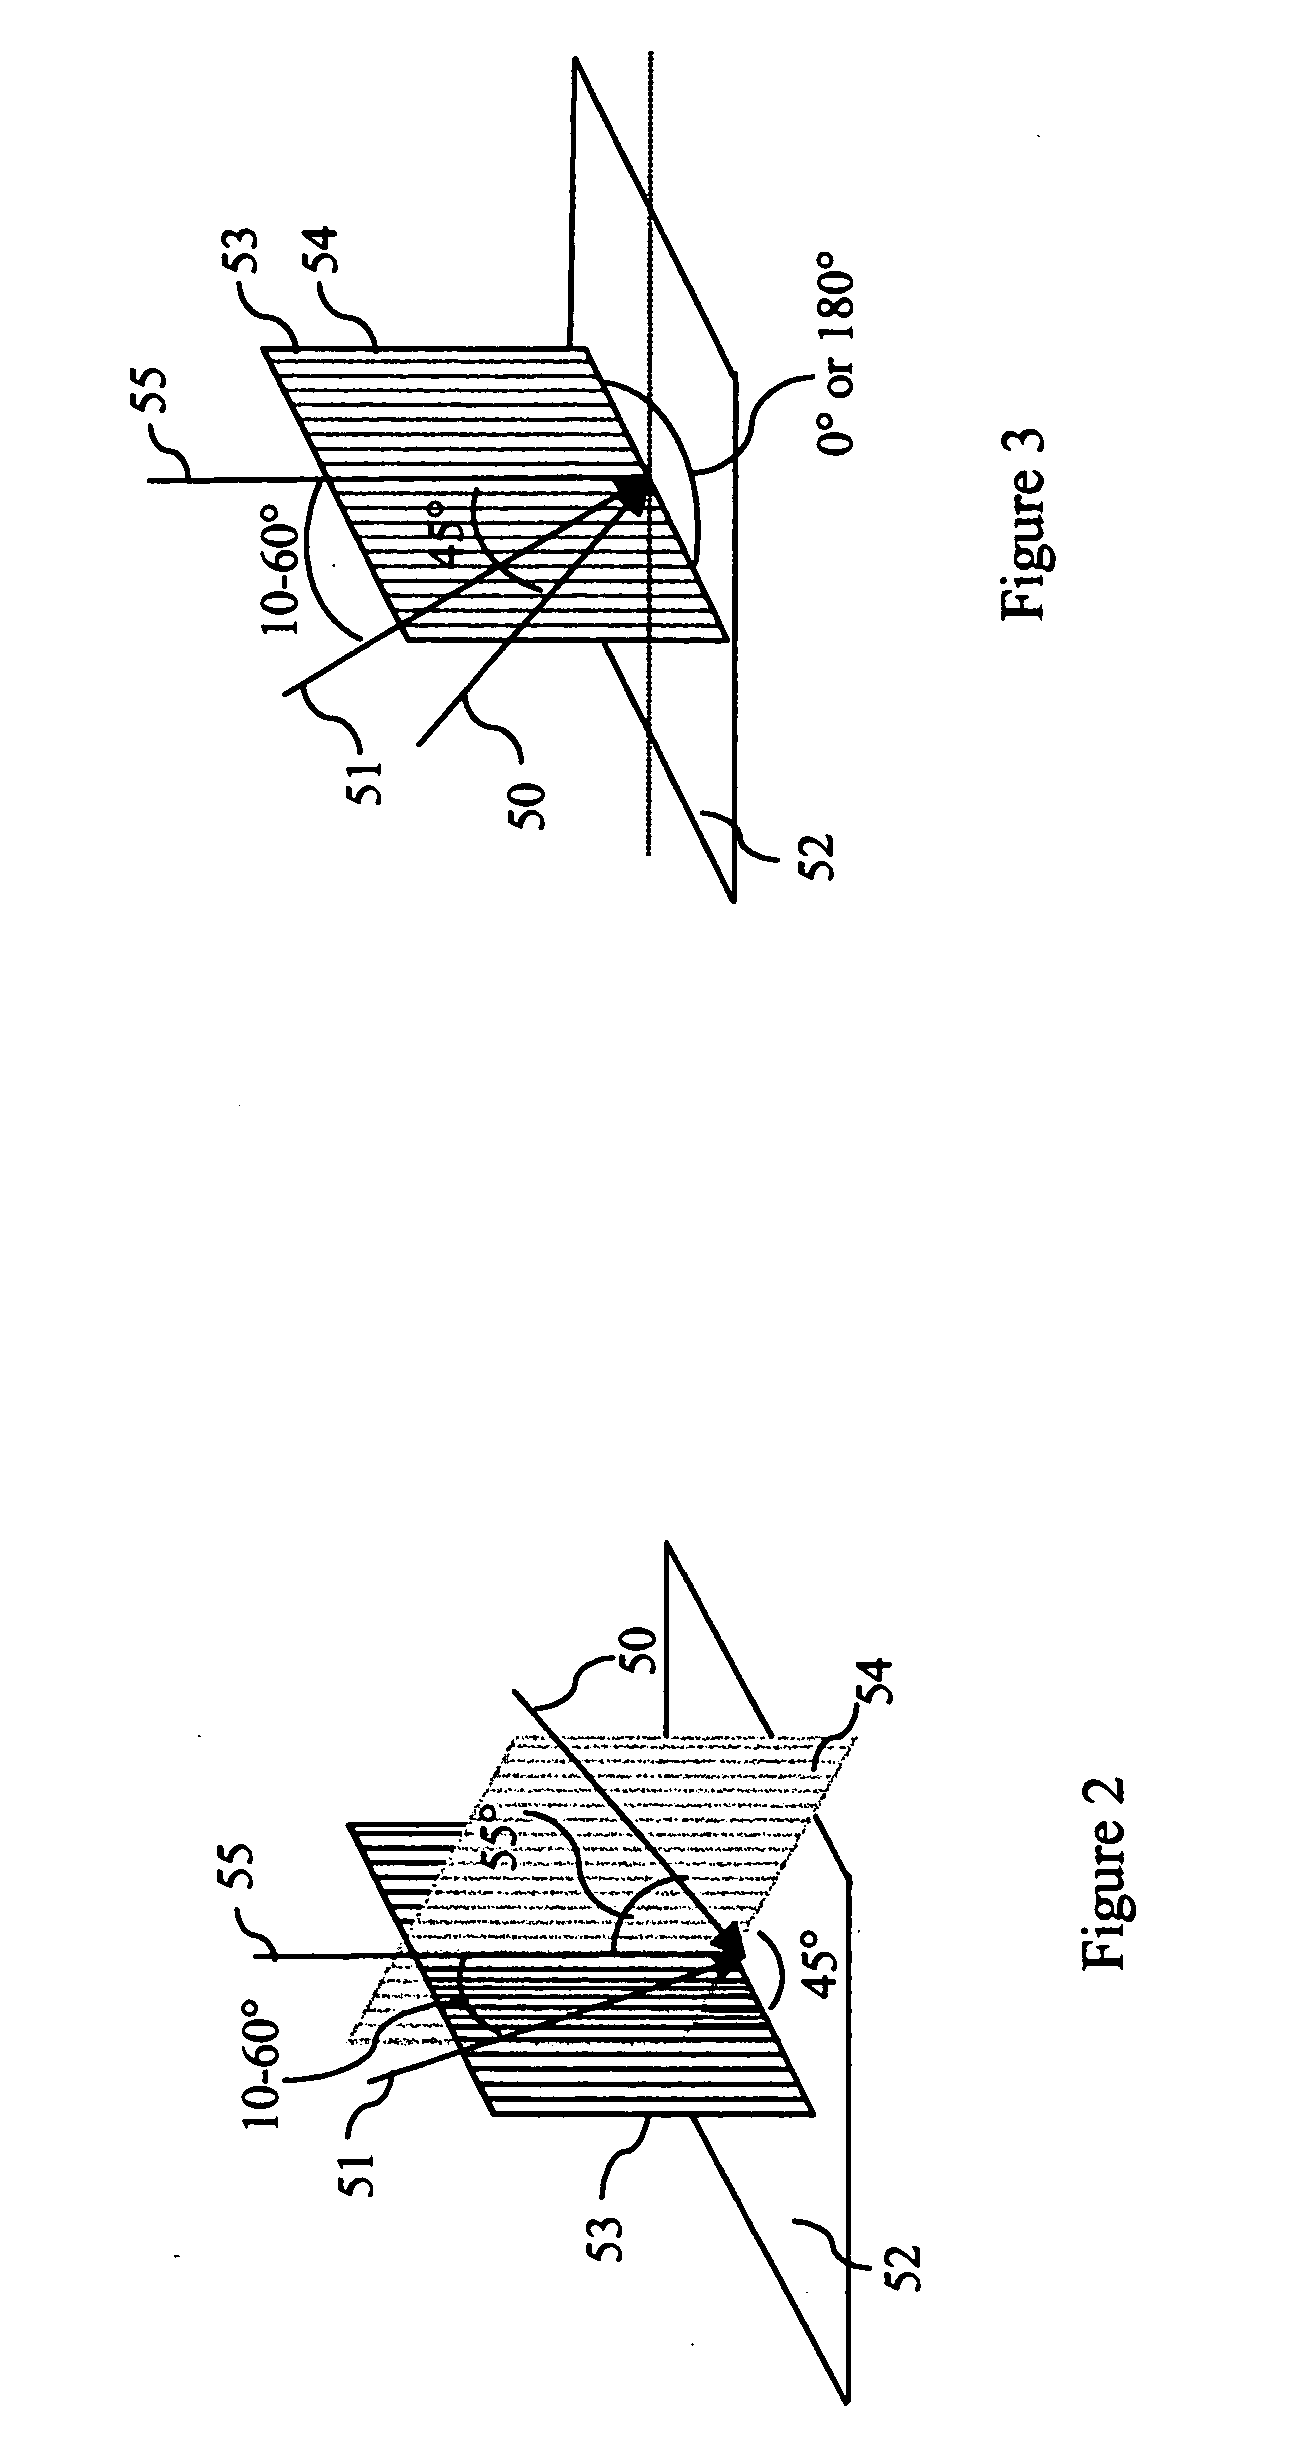 Biaxially-textured film deposition for superconductor coated tapes